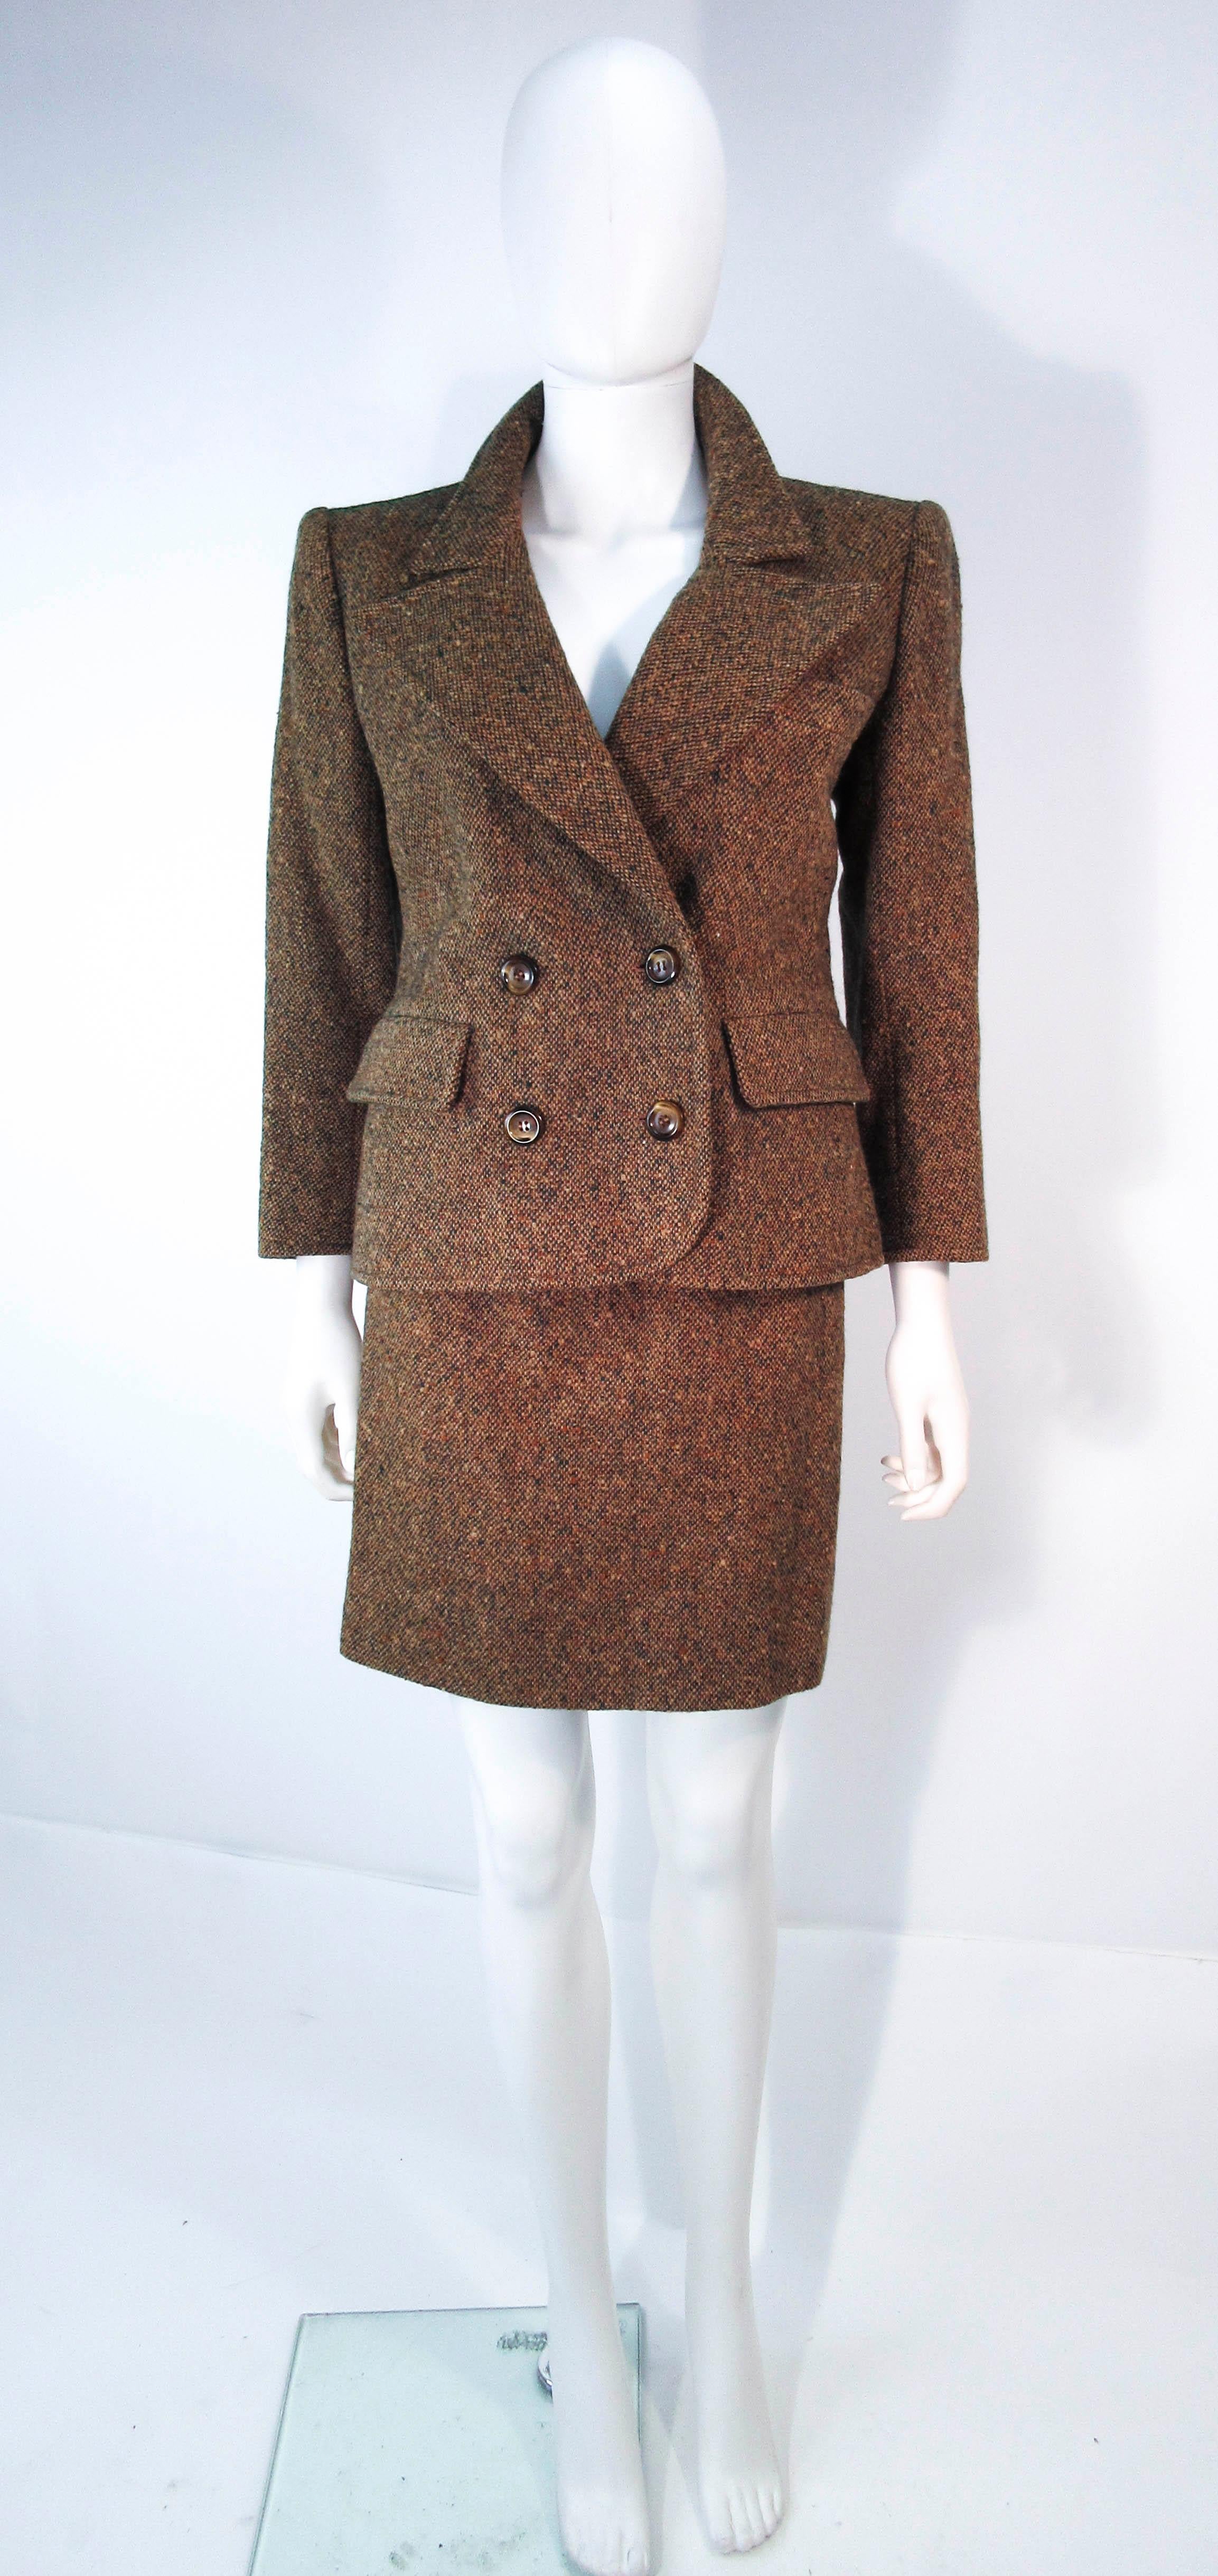 This Yves Saint Laurent suit is composed of a brown and green wool tweed. Features a beautiful classic double breasted blazer and a pencil skirt with zipper closure. In excellent vintage condition (some signs of wear due to age). Made in